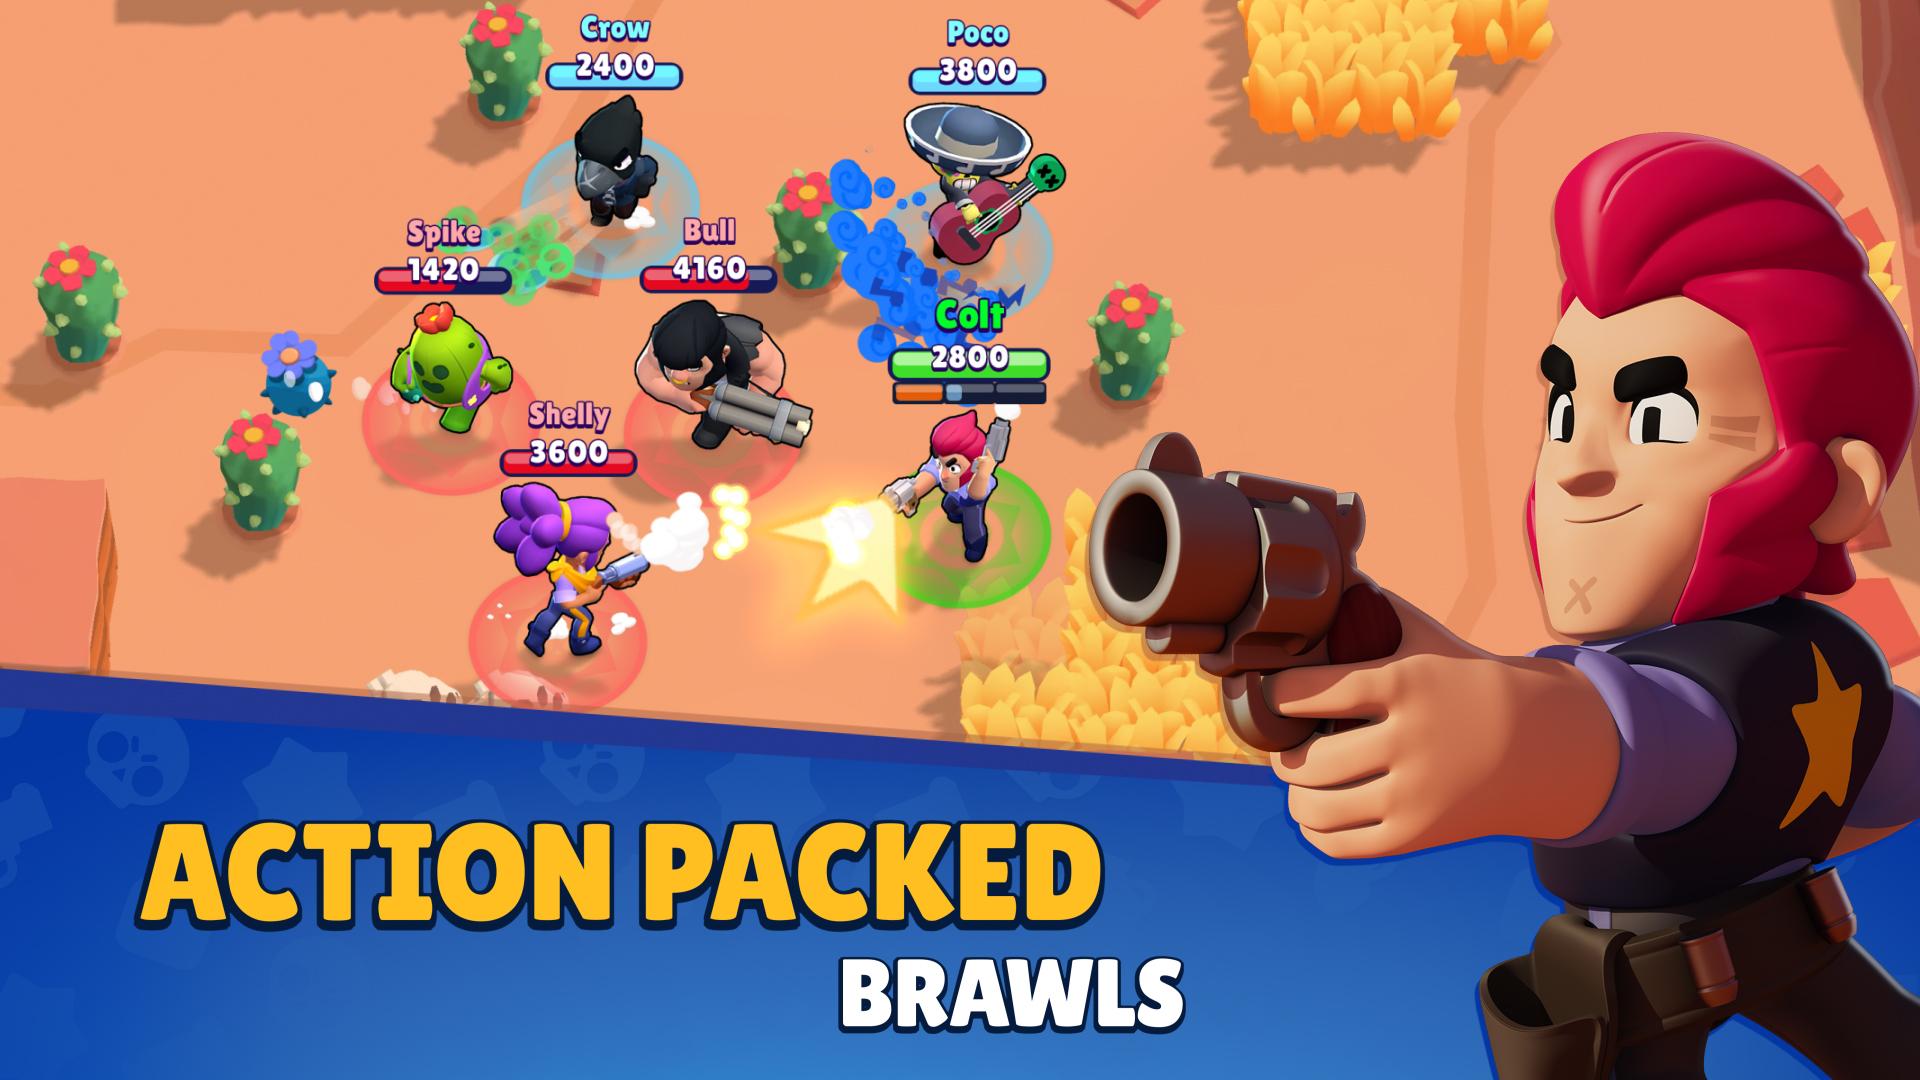 Brawl Stars: How To Get The Most Bang For Your Gem Buck. Premium Currency Guide